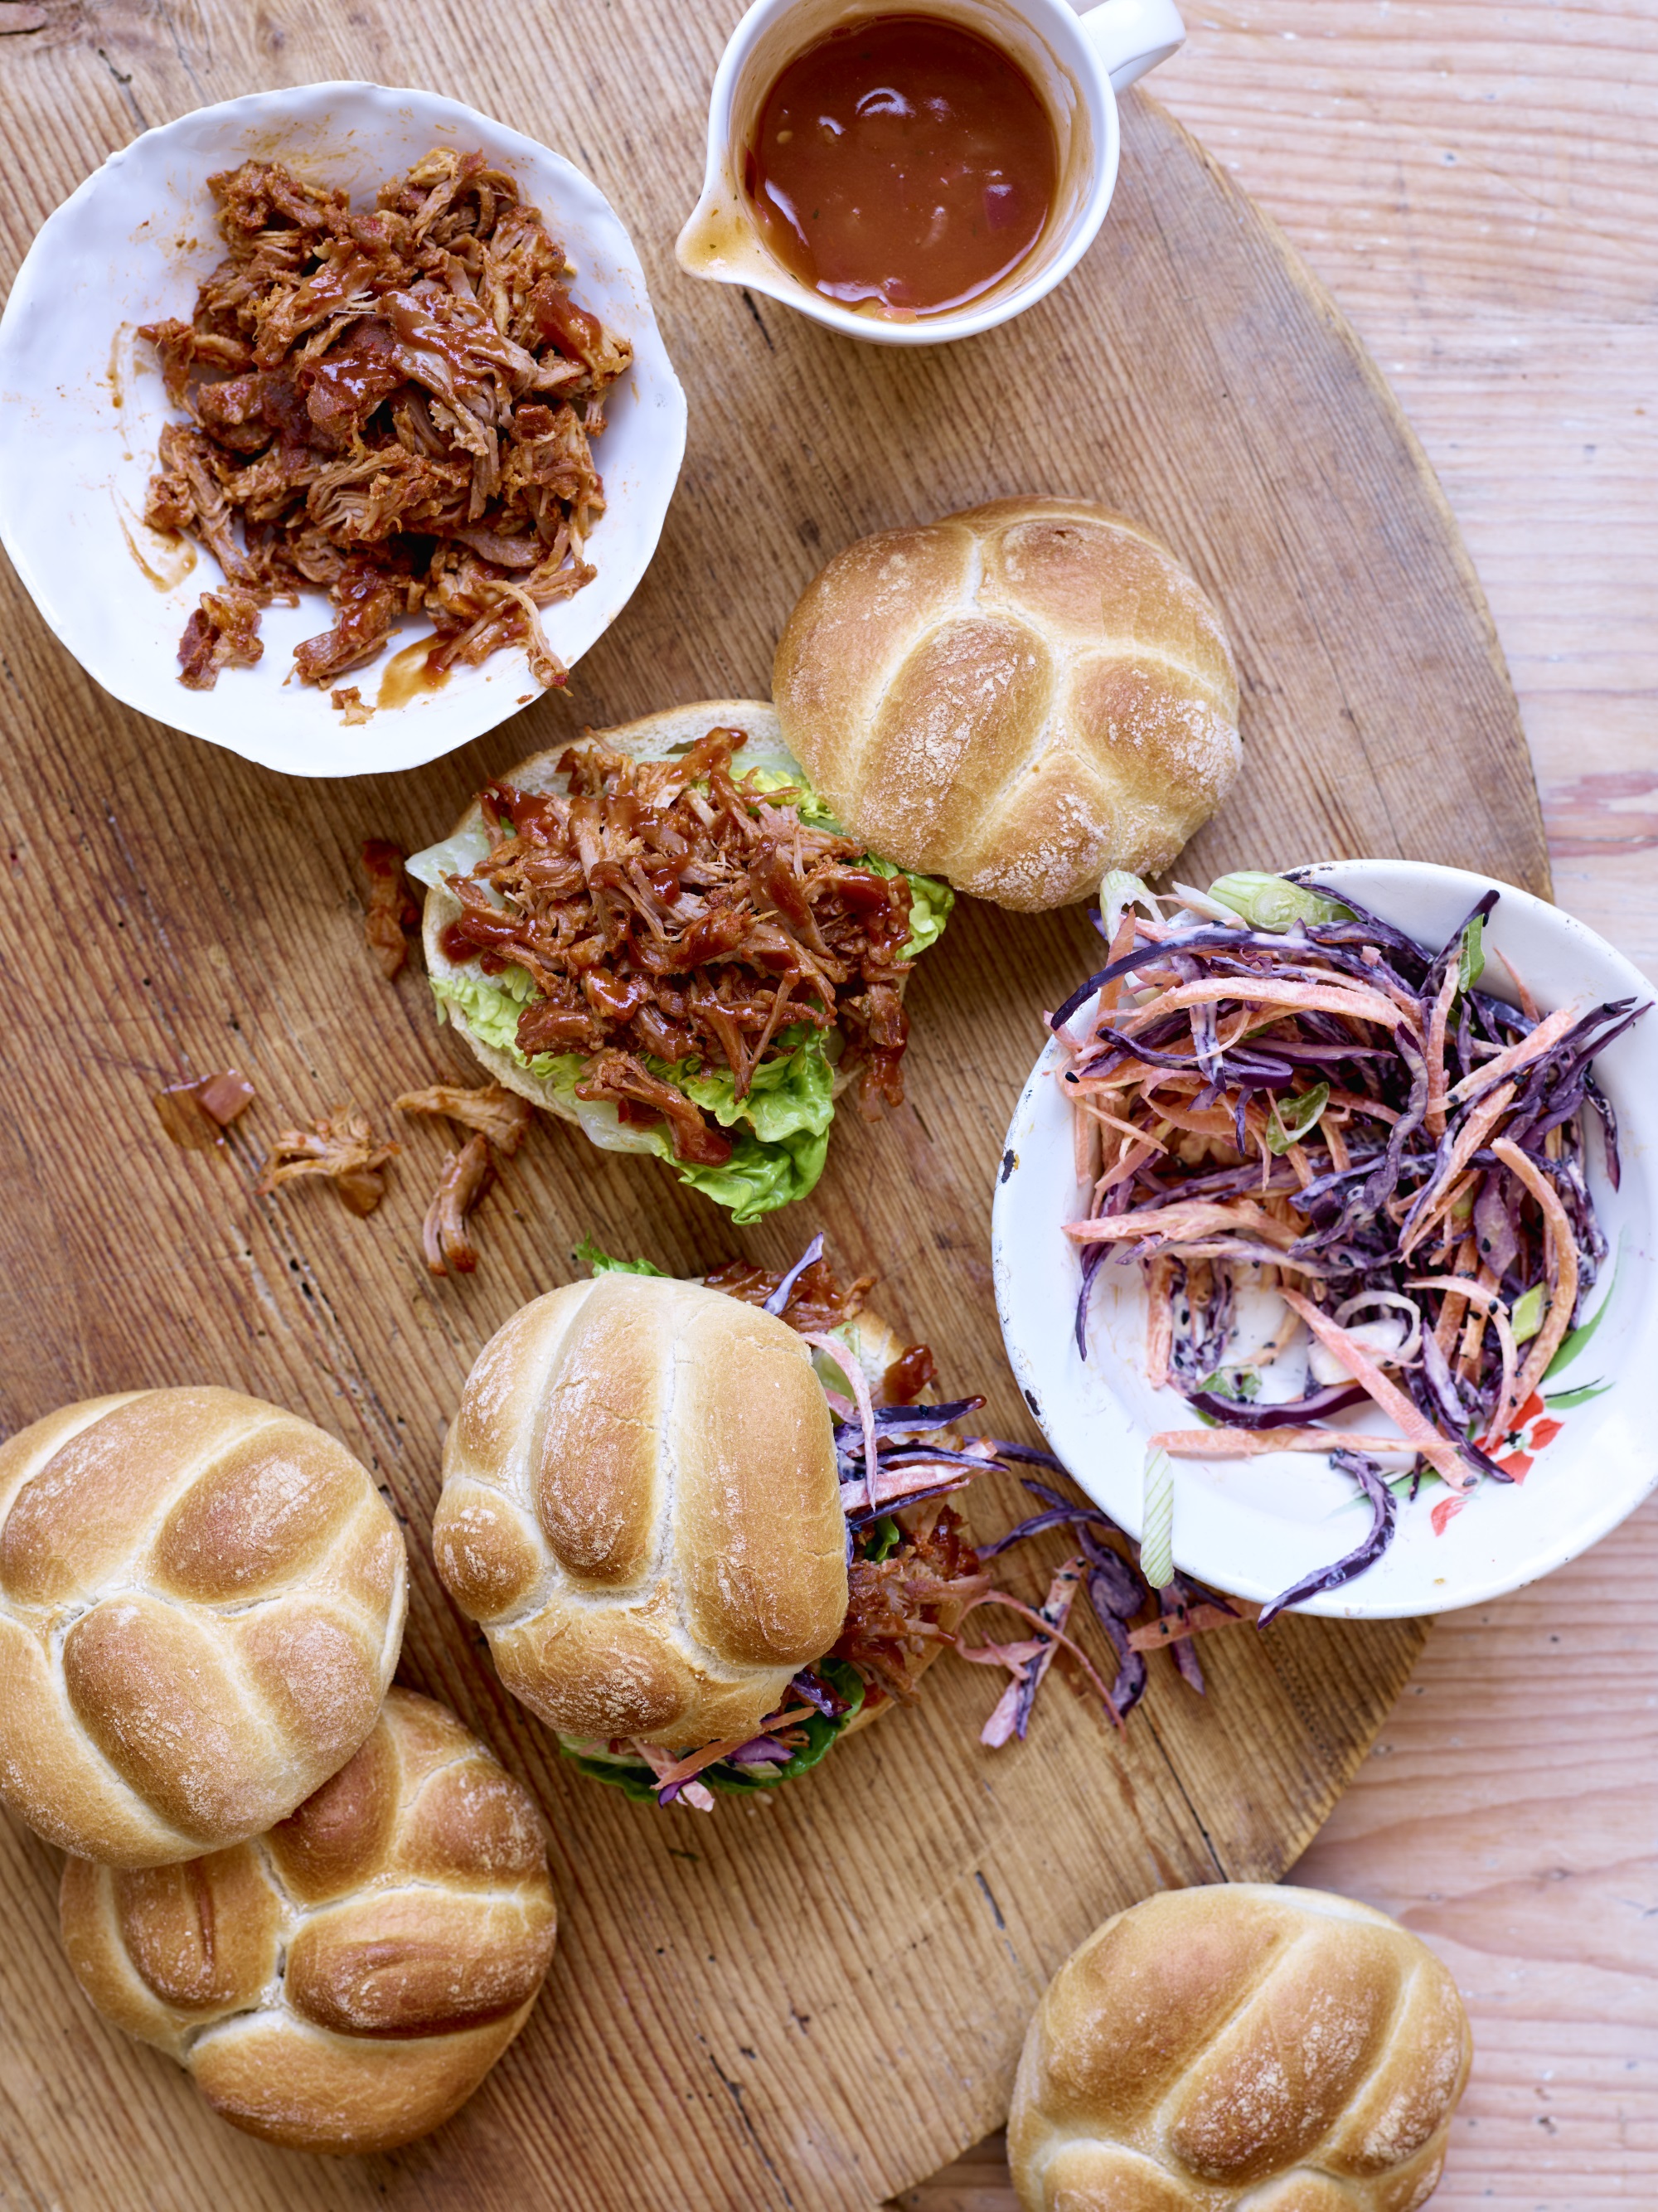 French’s BBQ Pulled Pork Sloppy Style burgers (French's/Pa)